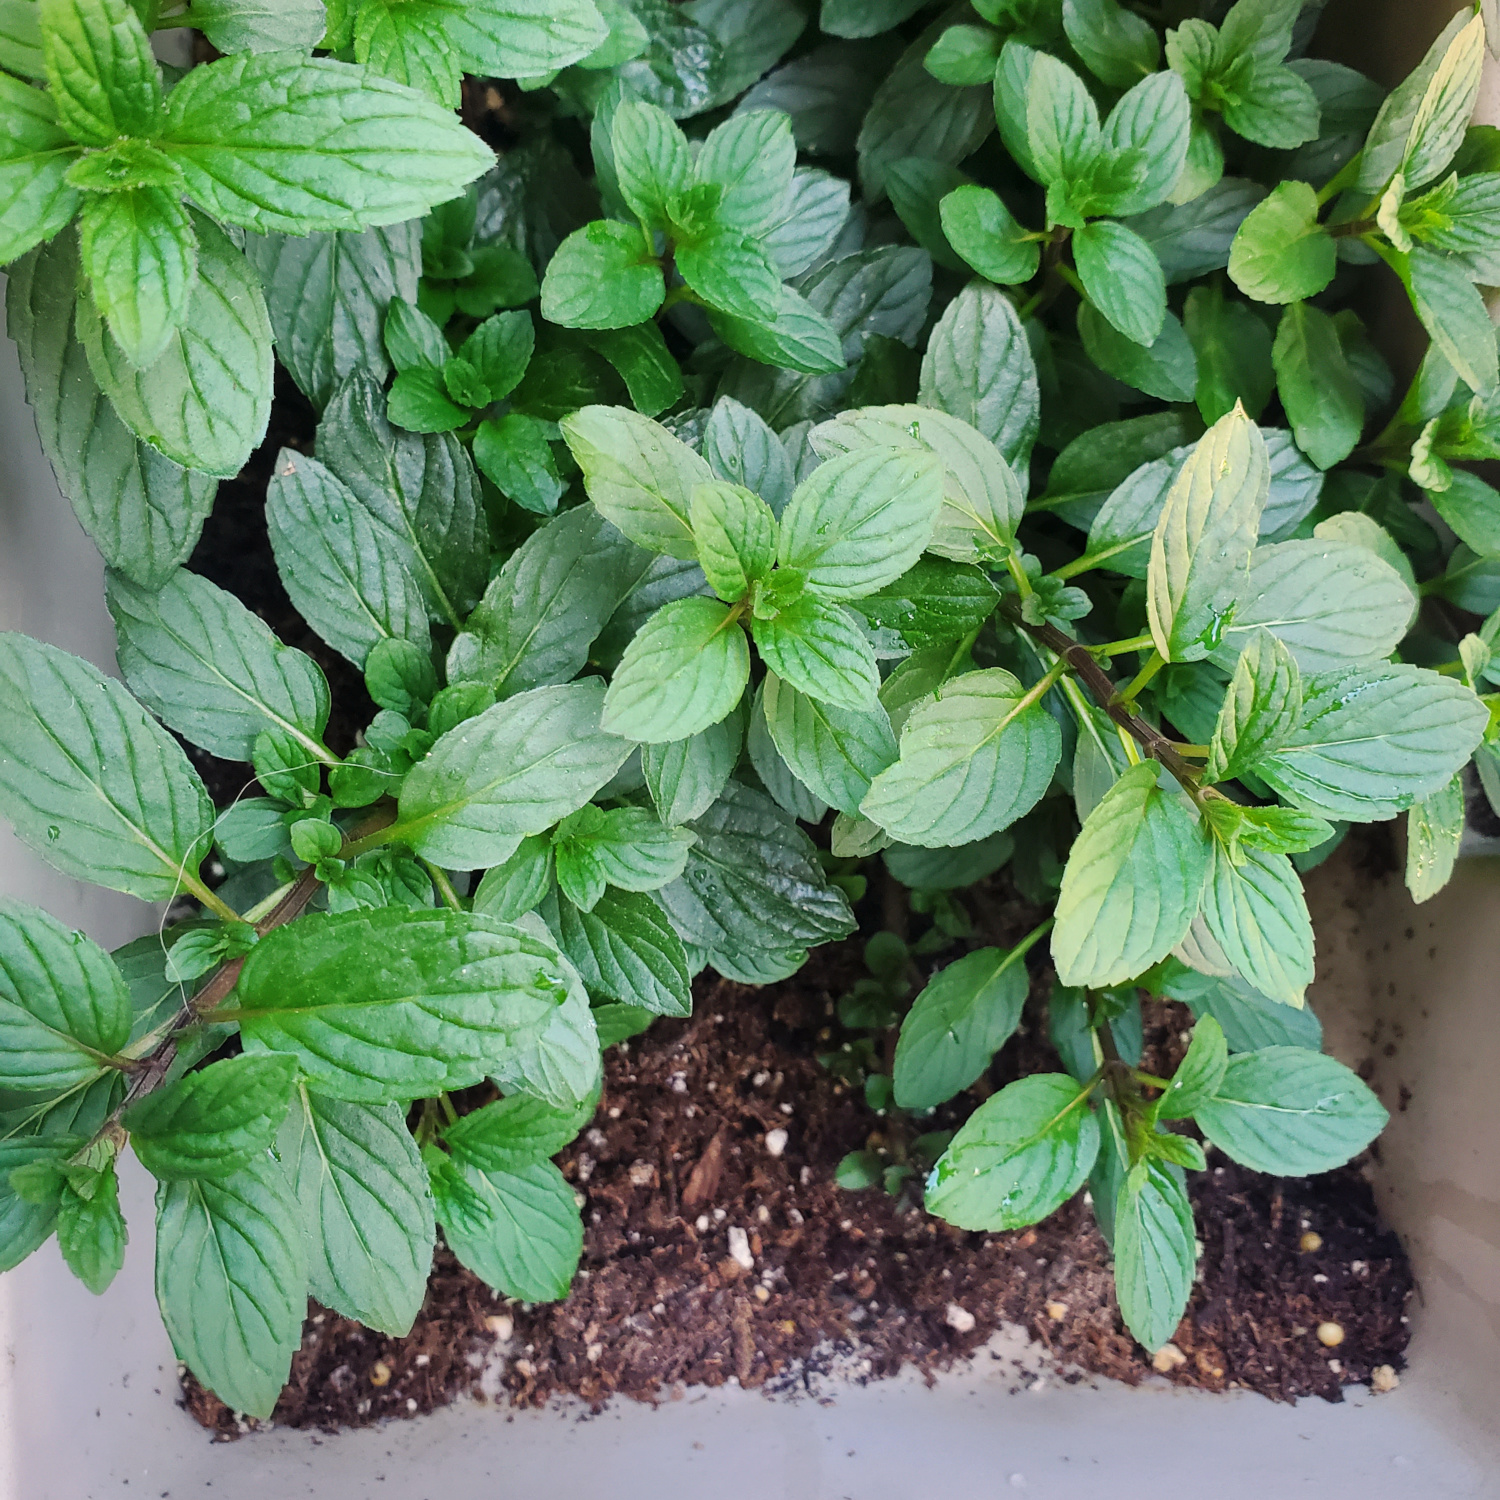 The mint is filling in all the empty spaces in the planter